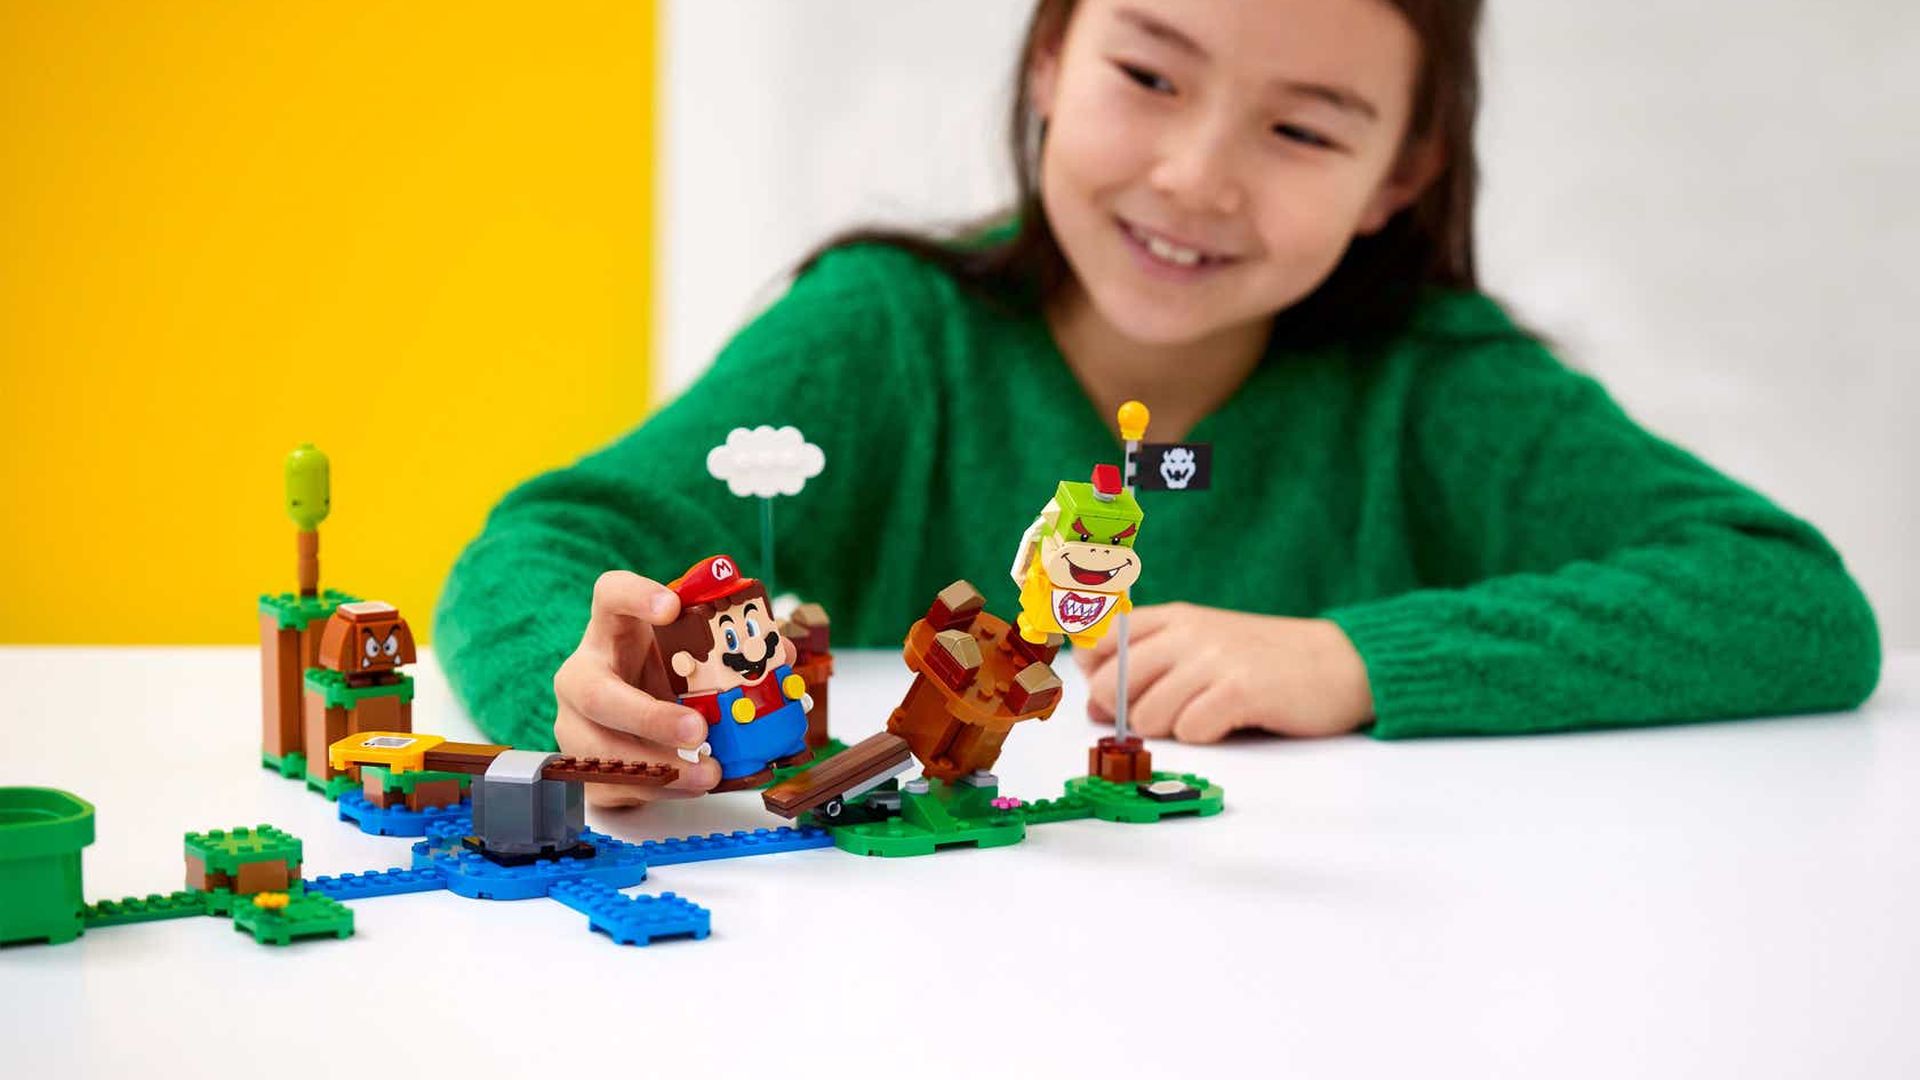 A girl playing with Lego's new Super Mario collection.